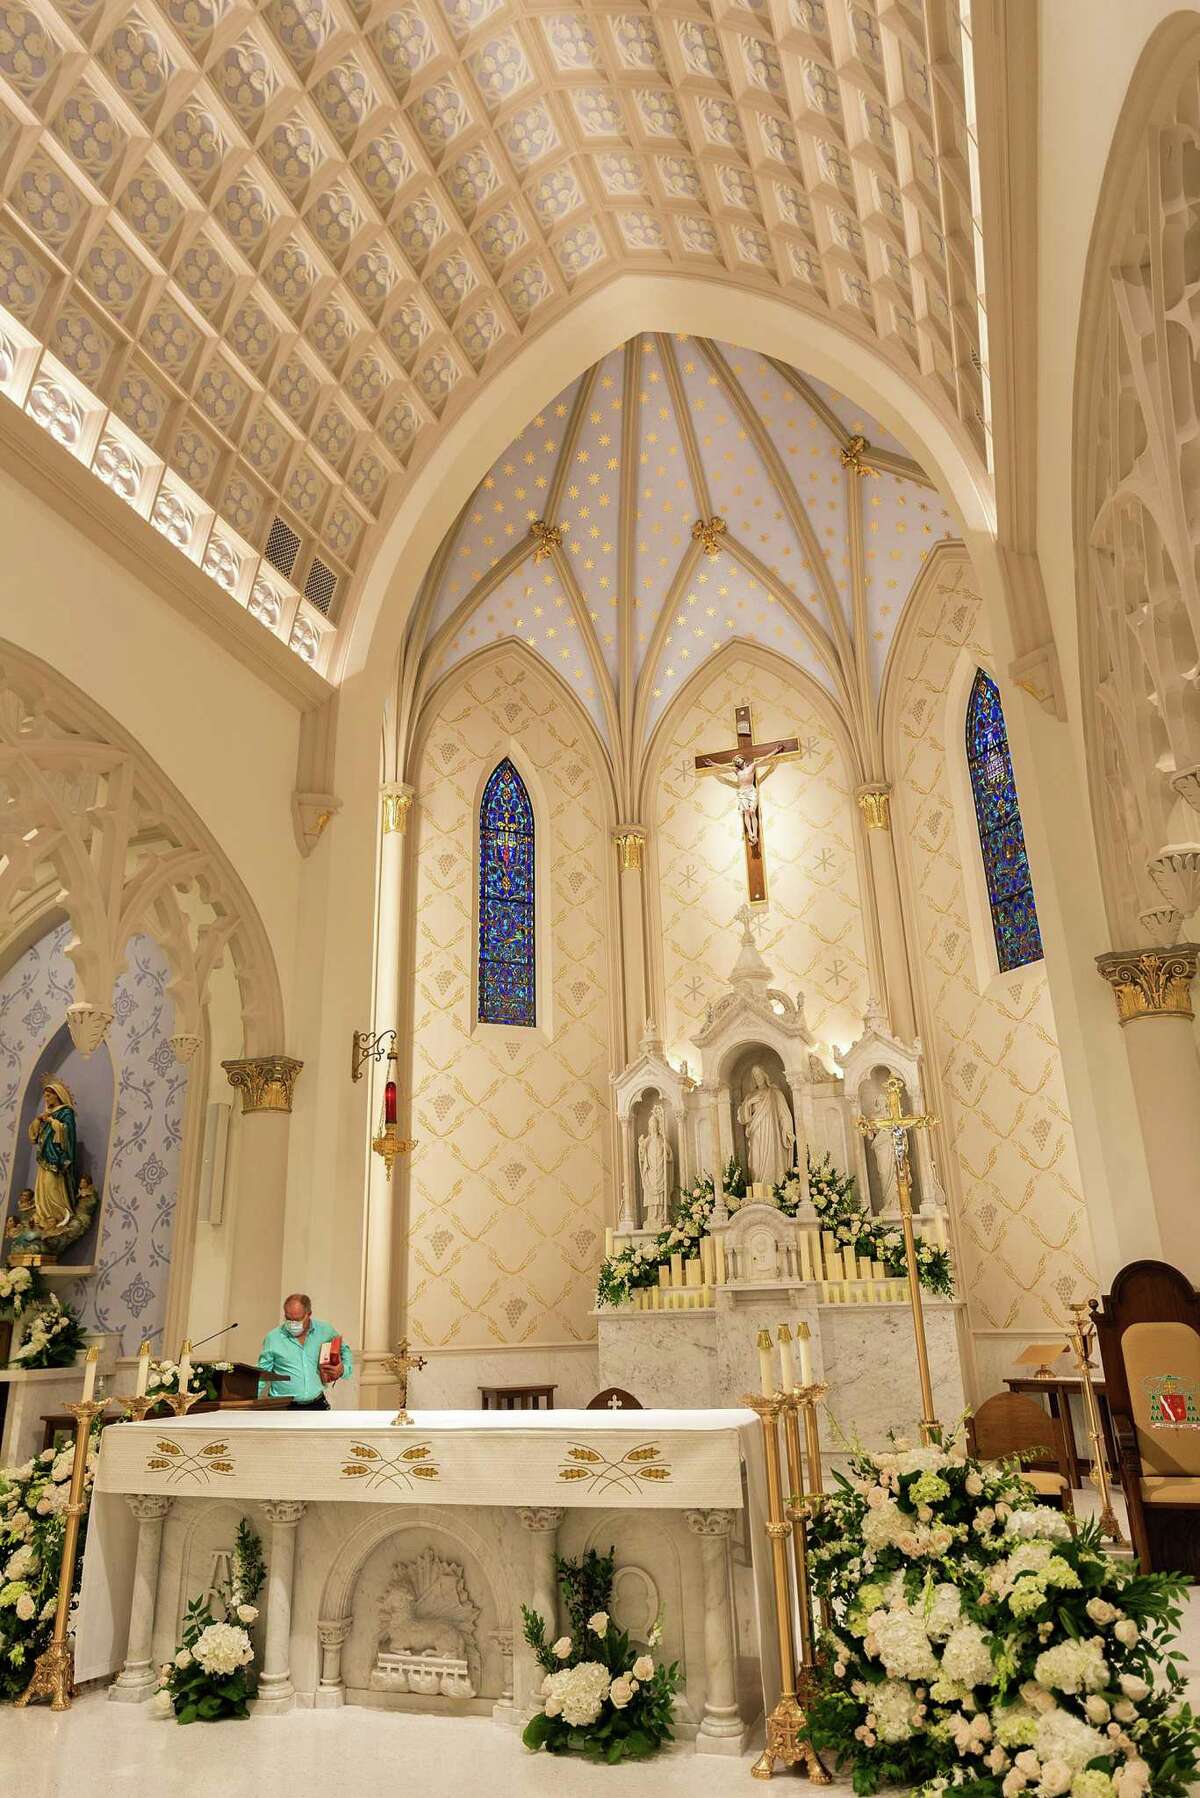 The altar of the newly renovated San Agustin Cathedral is cleared after a mass, Sunday, June 6, 2021.